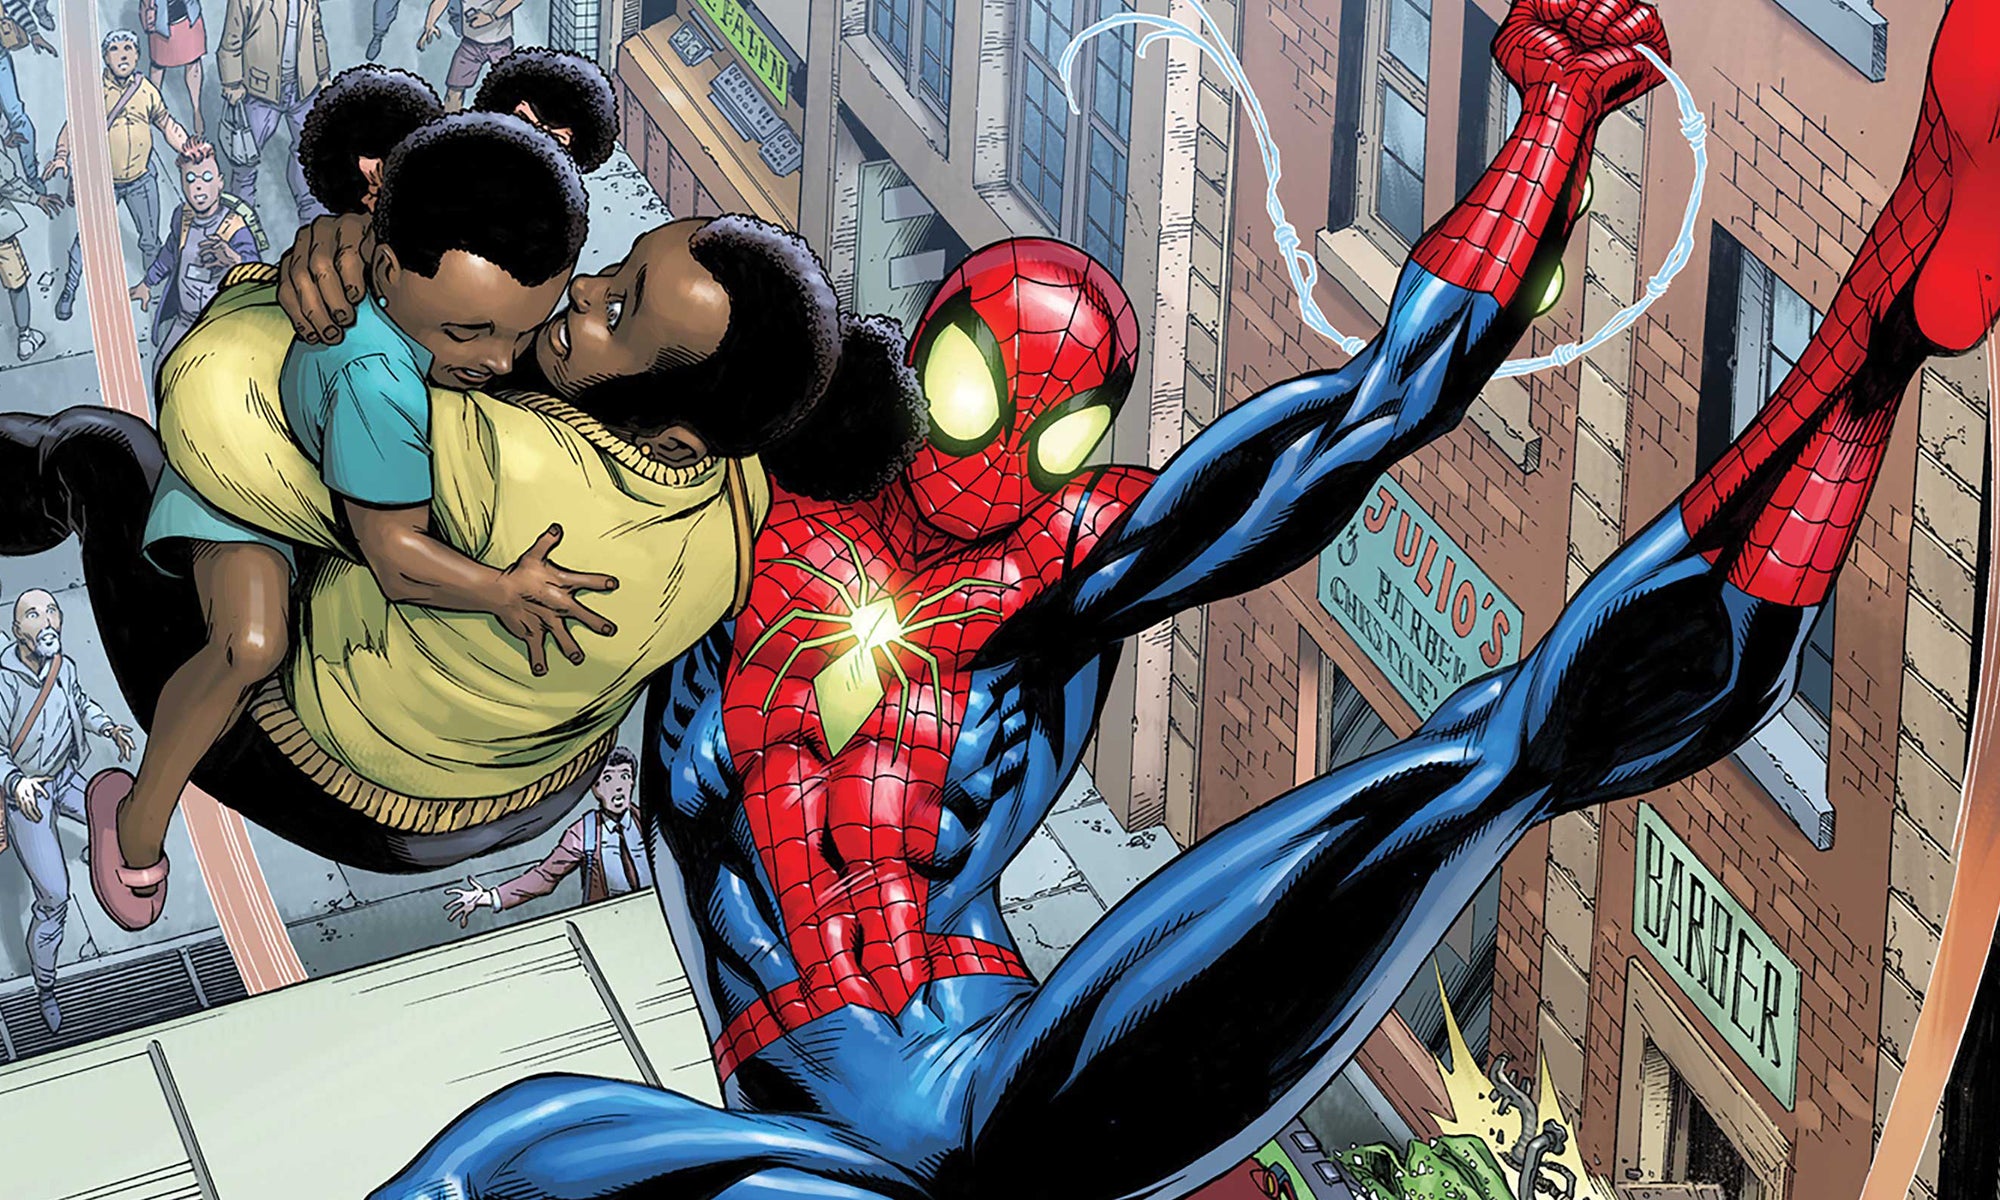 The Spider-Verse is getting even bigger, with an all-new second ongoing  Spider-Man book by Dan Slott and Mark Bagley | Popverse